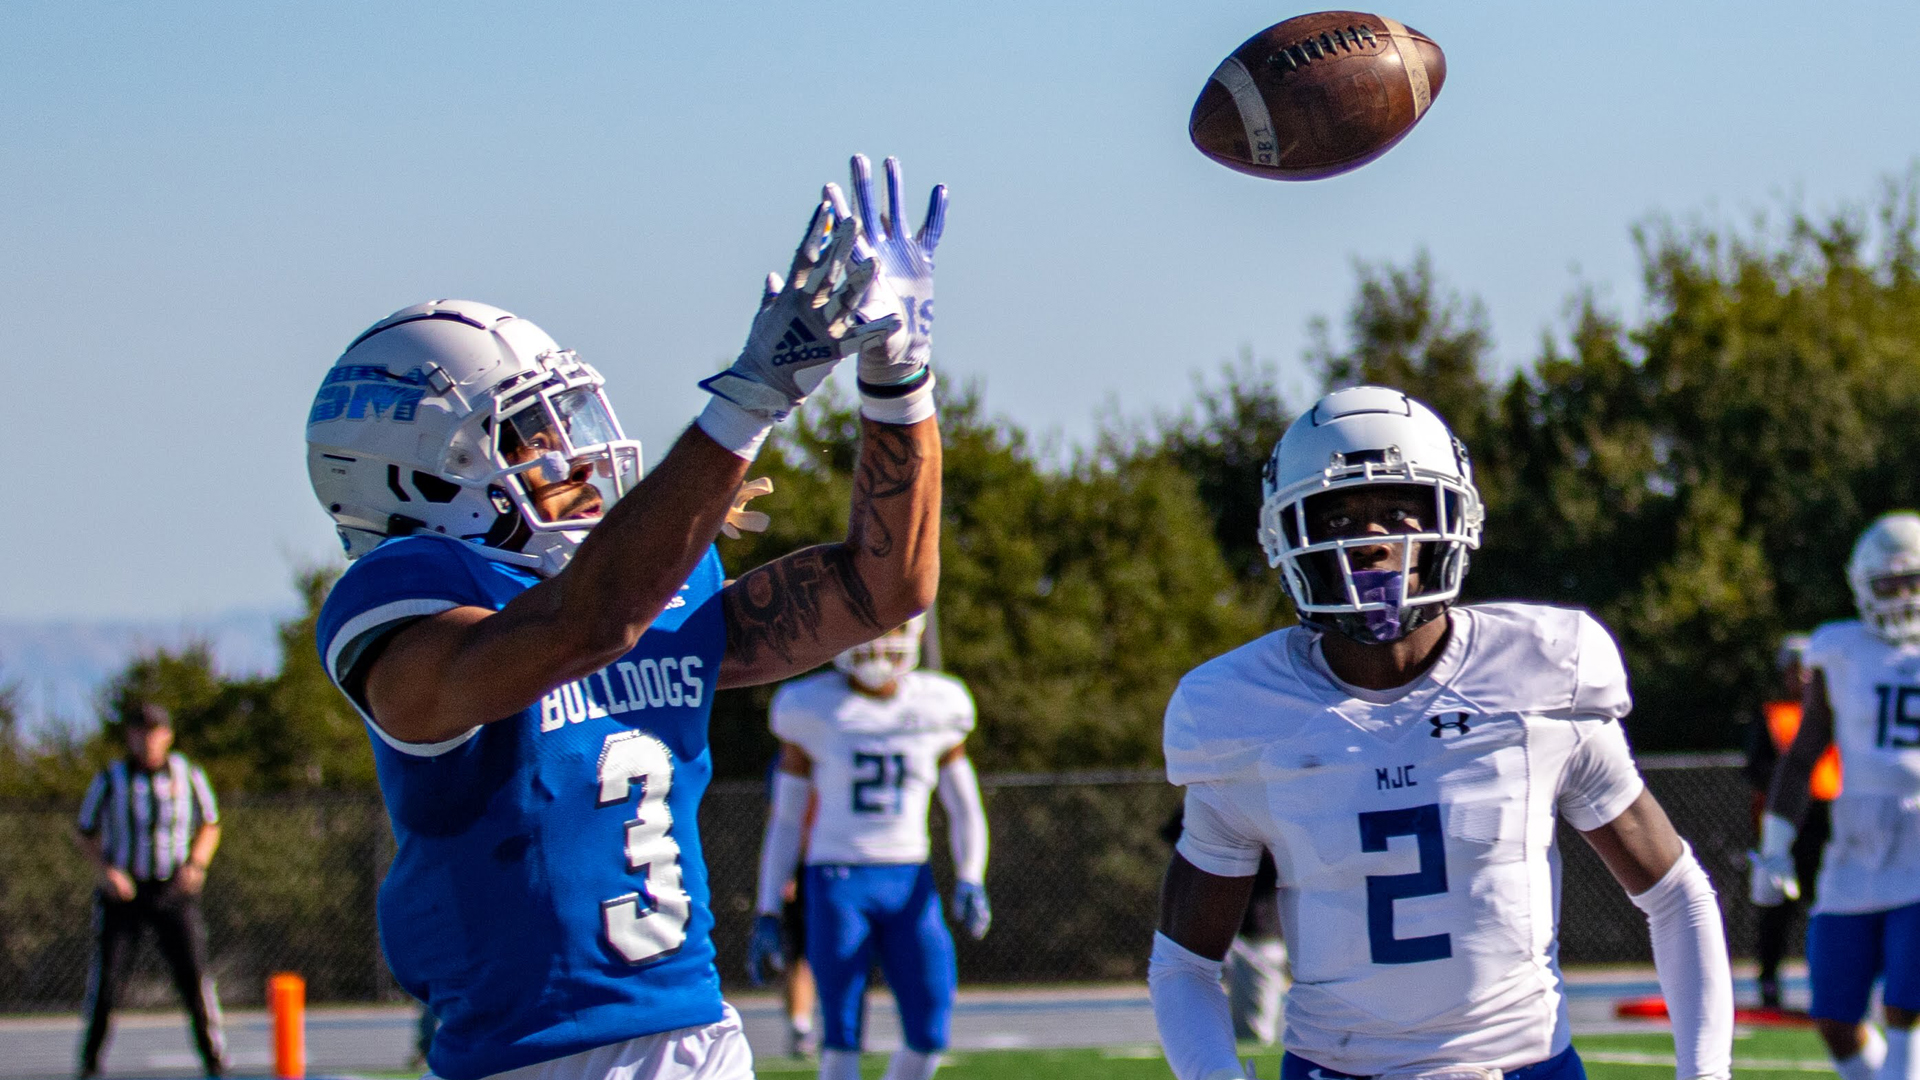 Terence Loville's first-quarter TD gave CSM a 7-0 lead. (Photo by Ronald Rugel Photography)